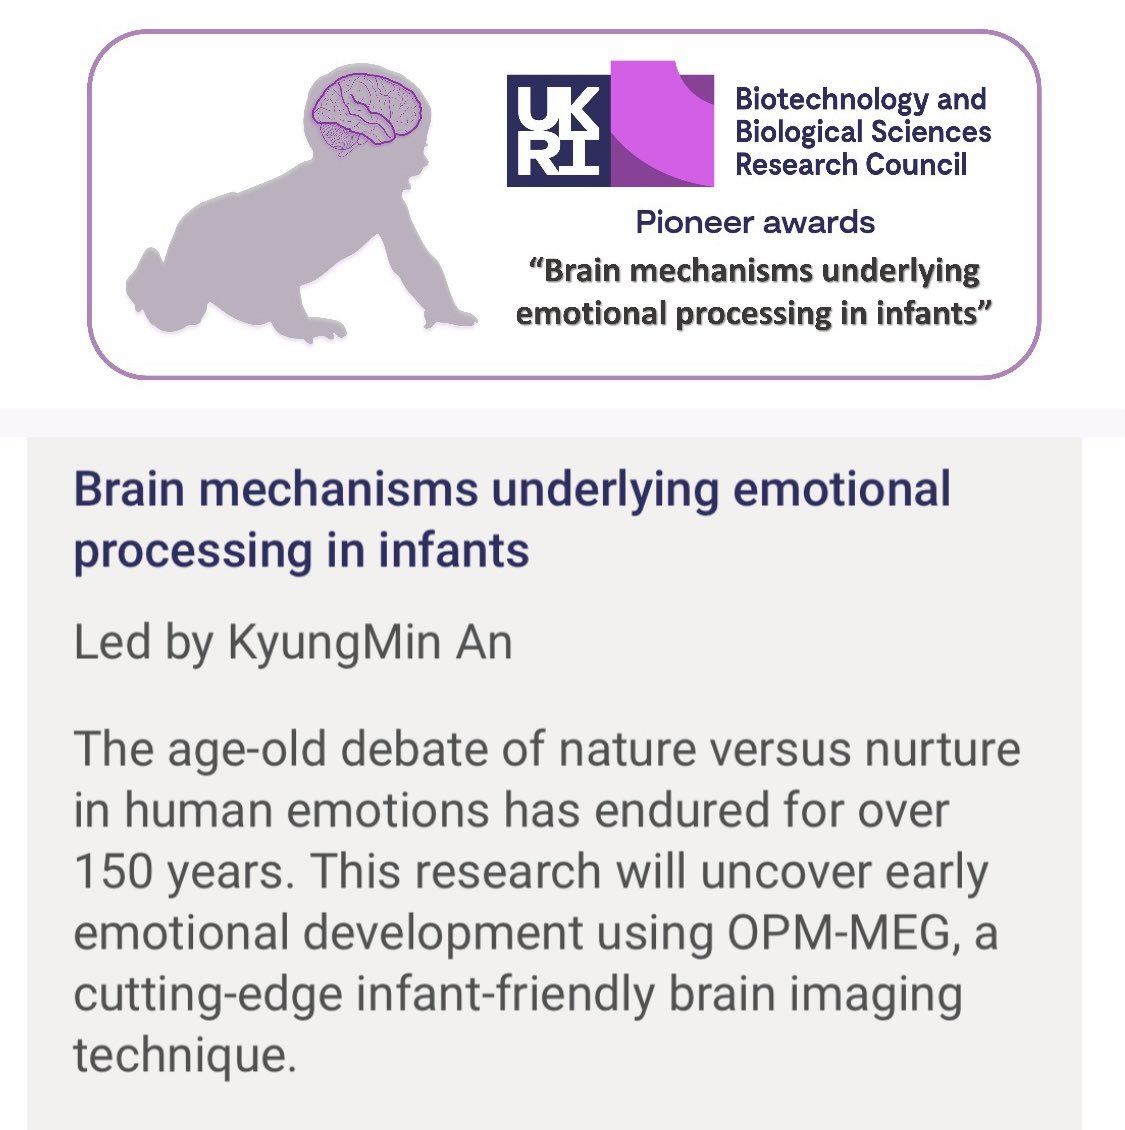 🌟 We're hiring a postdoc researcher to delve into infant emotion processing using OPM-MEG for the #BBSRC Pioneer award. Interested? Drop us a line! If you're at #SfN23 #SfN2023, let's connect in person for a chat! 😉